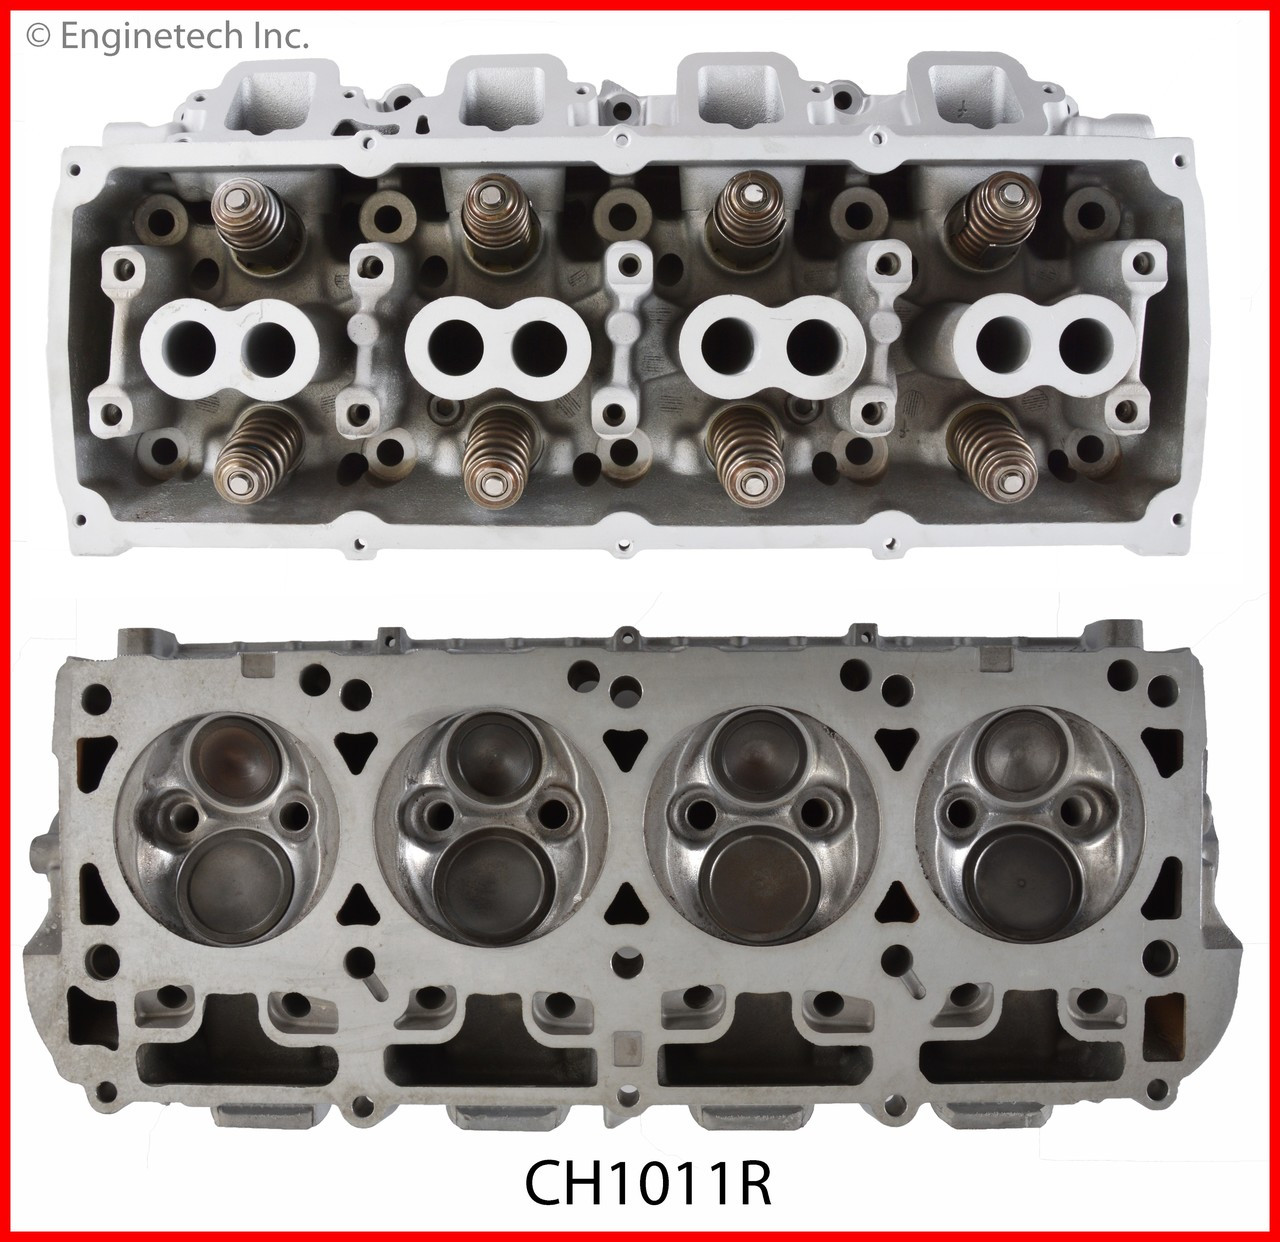 Cylinder Head Assembly - 2004 Dodge Ram 1500 5.7L (CH1011R.A5)